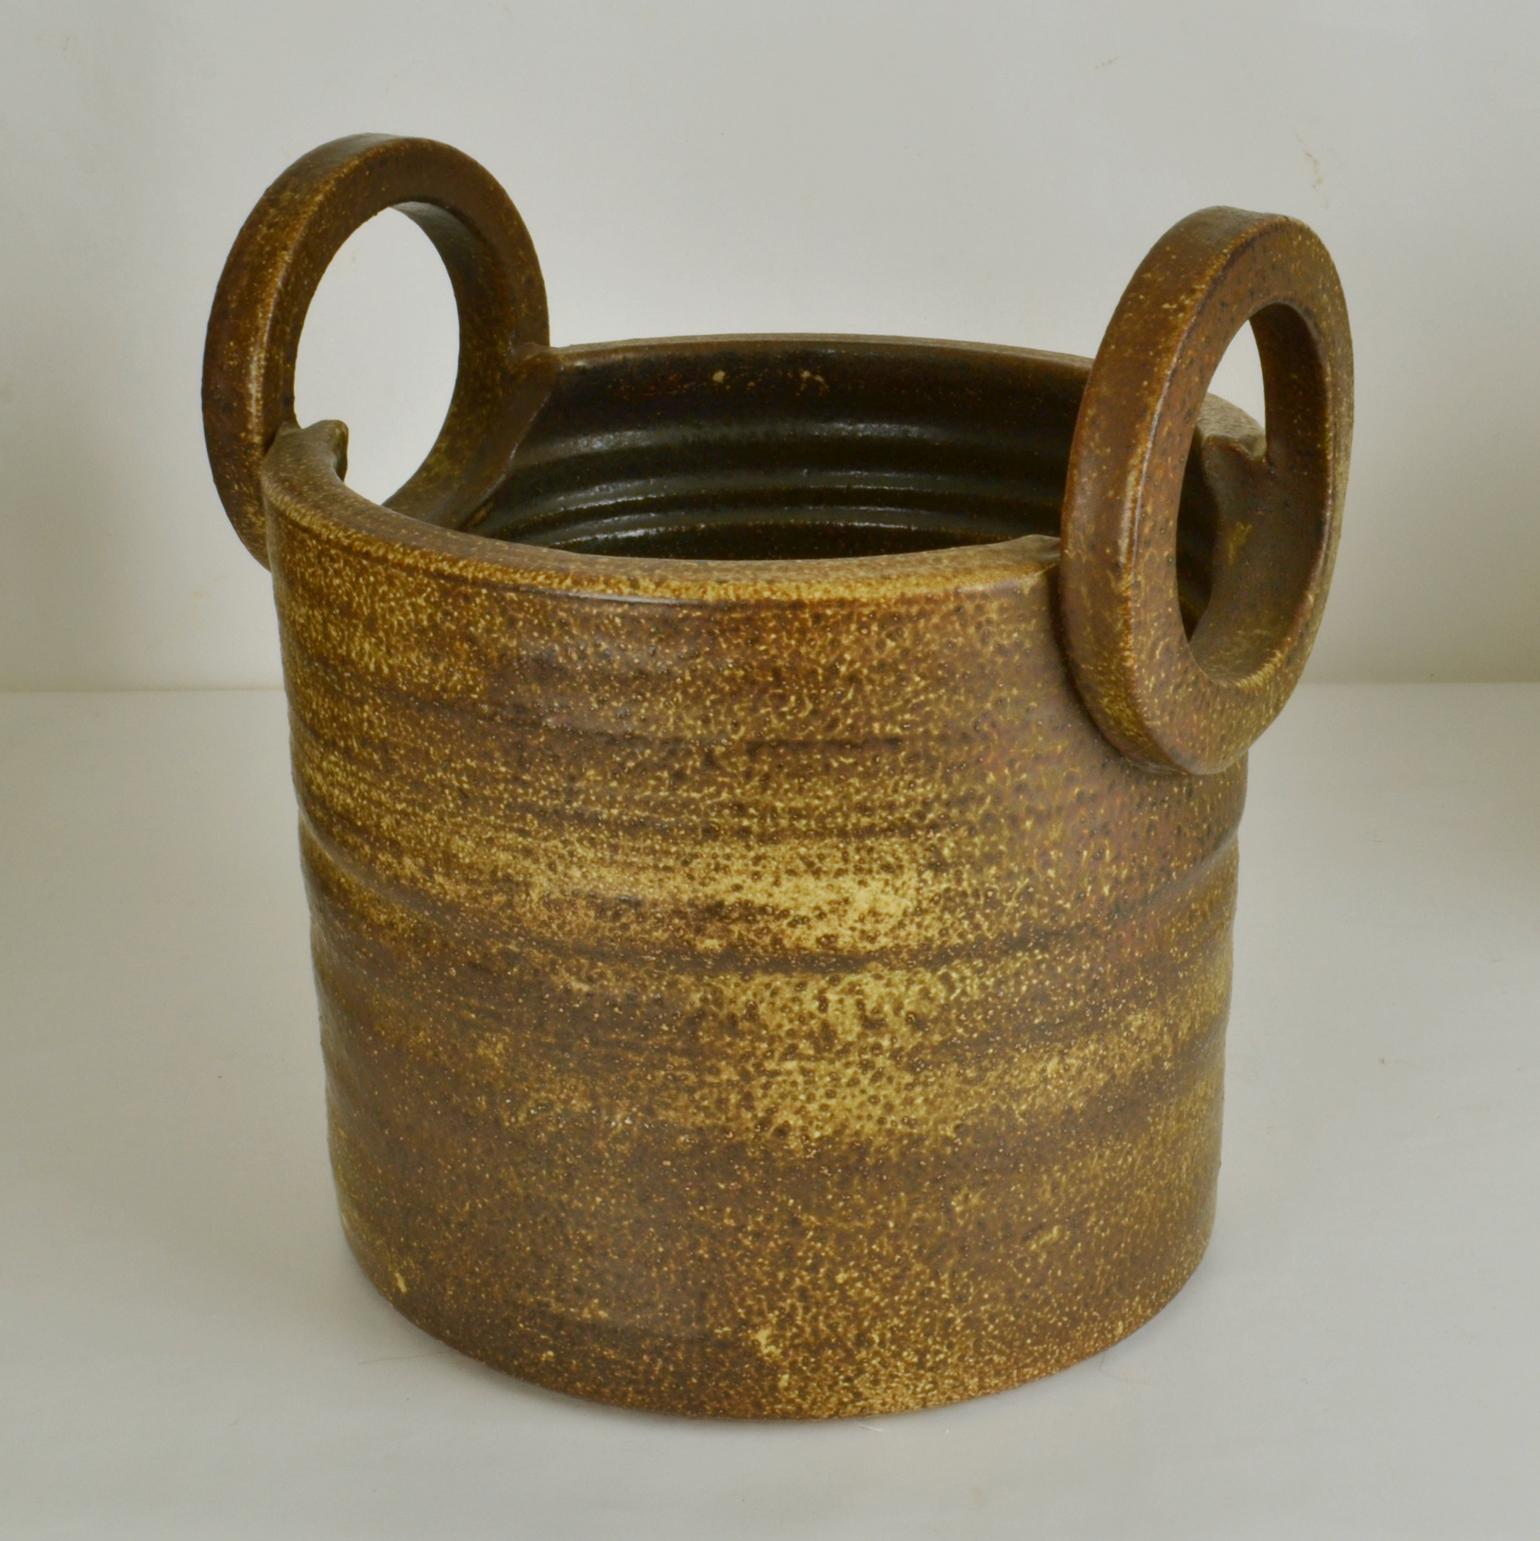 Large hand turned 1960's studio ceramic plant pot with over sized handles is created on the turning wheel by highly technical skilled Dutch ceramist Piet Knepper for Mobach. The glaze in browns and ocher is inspired by in nature and highly